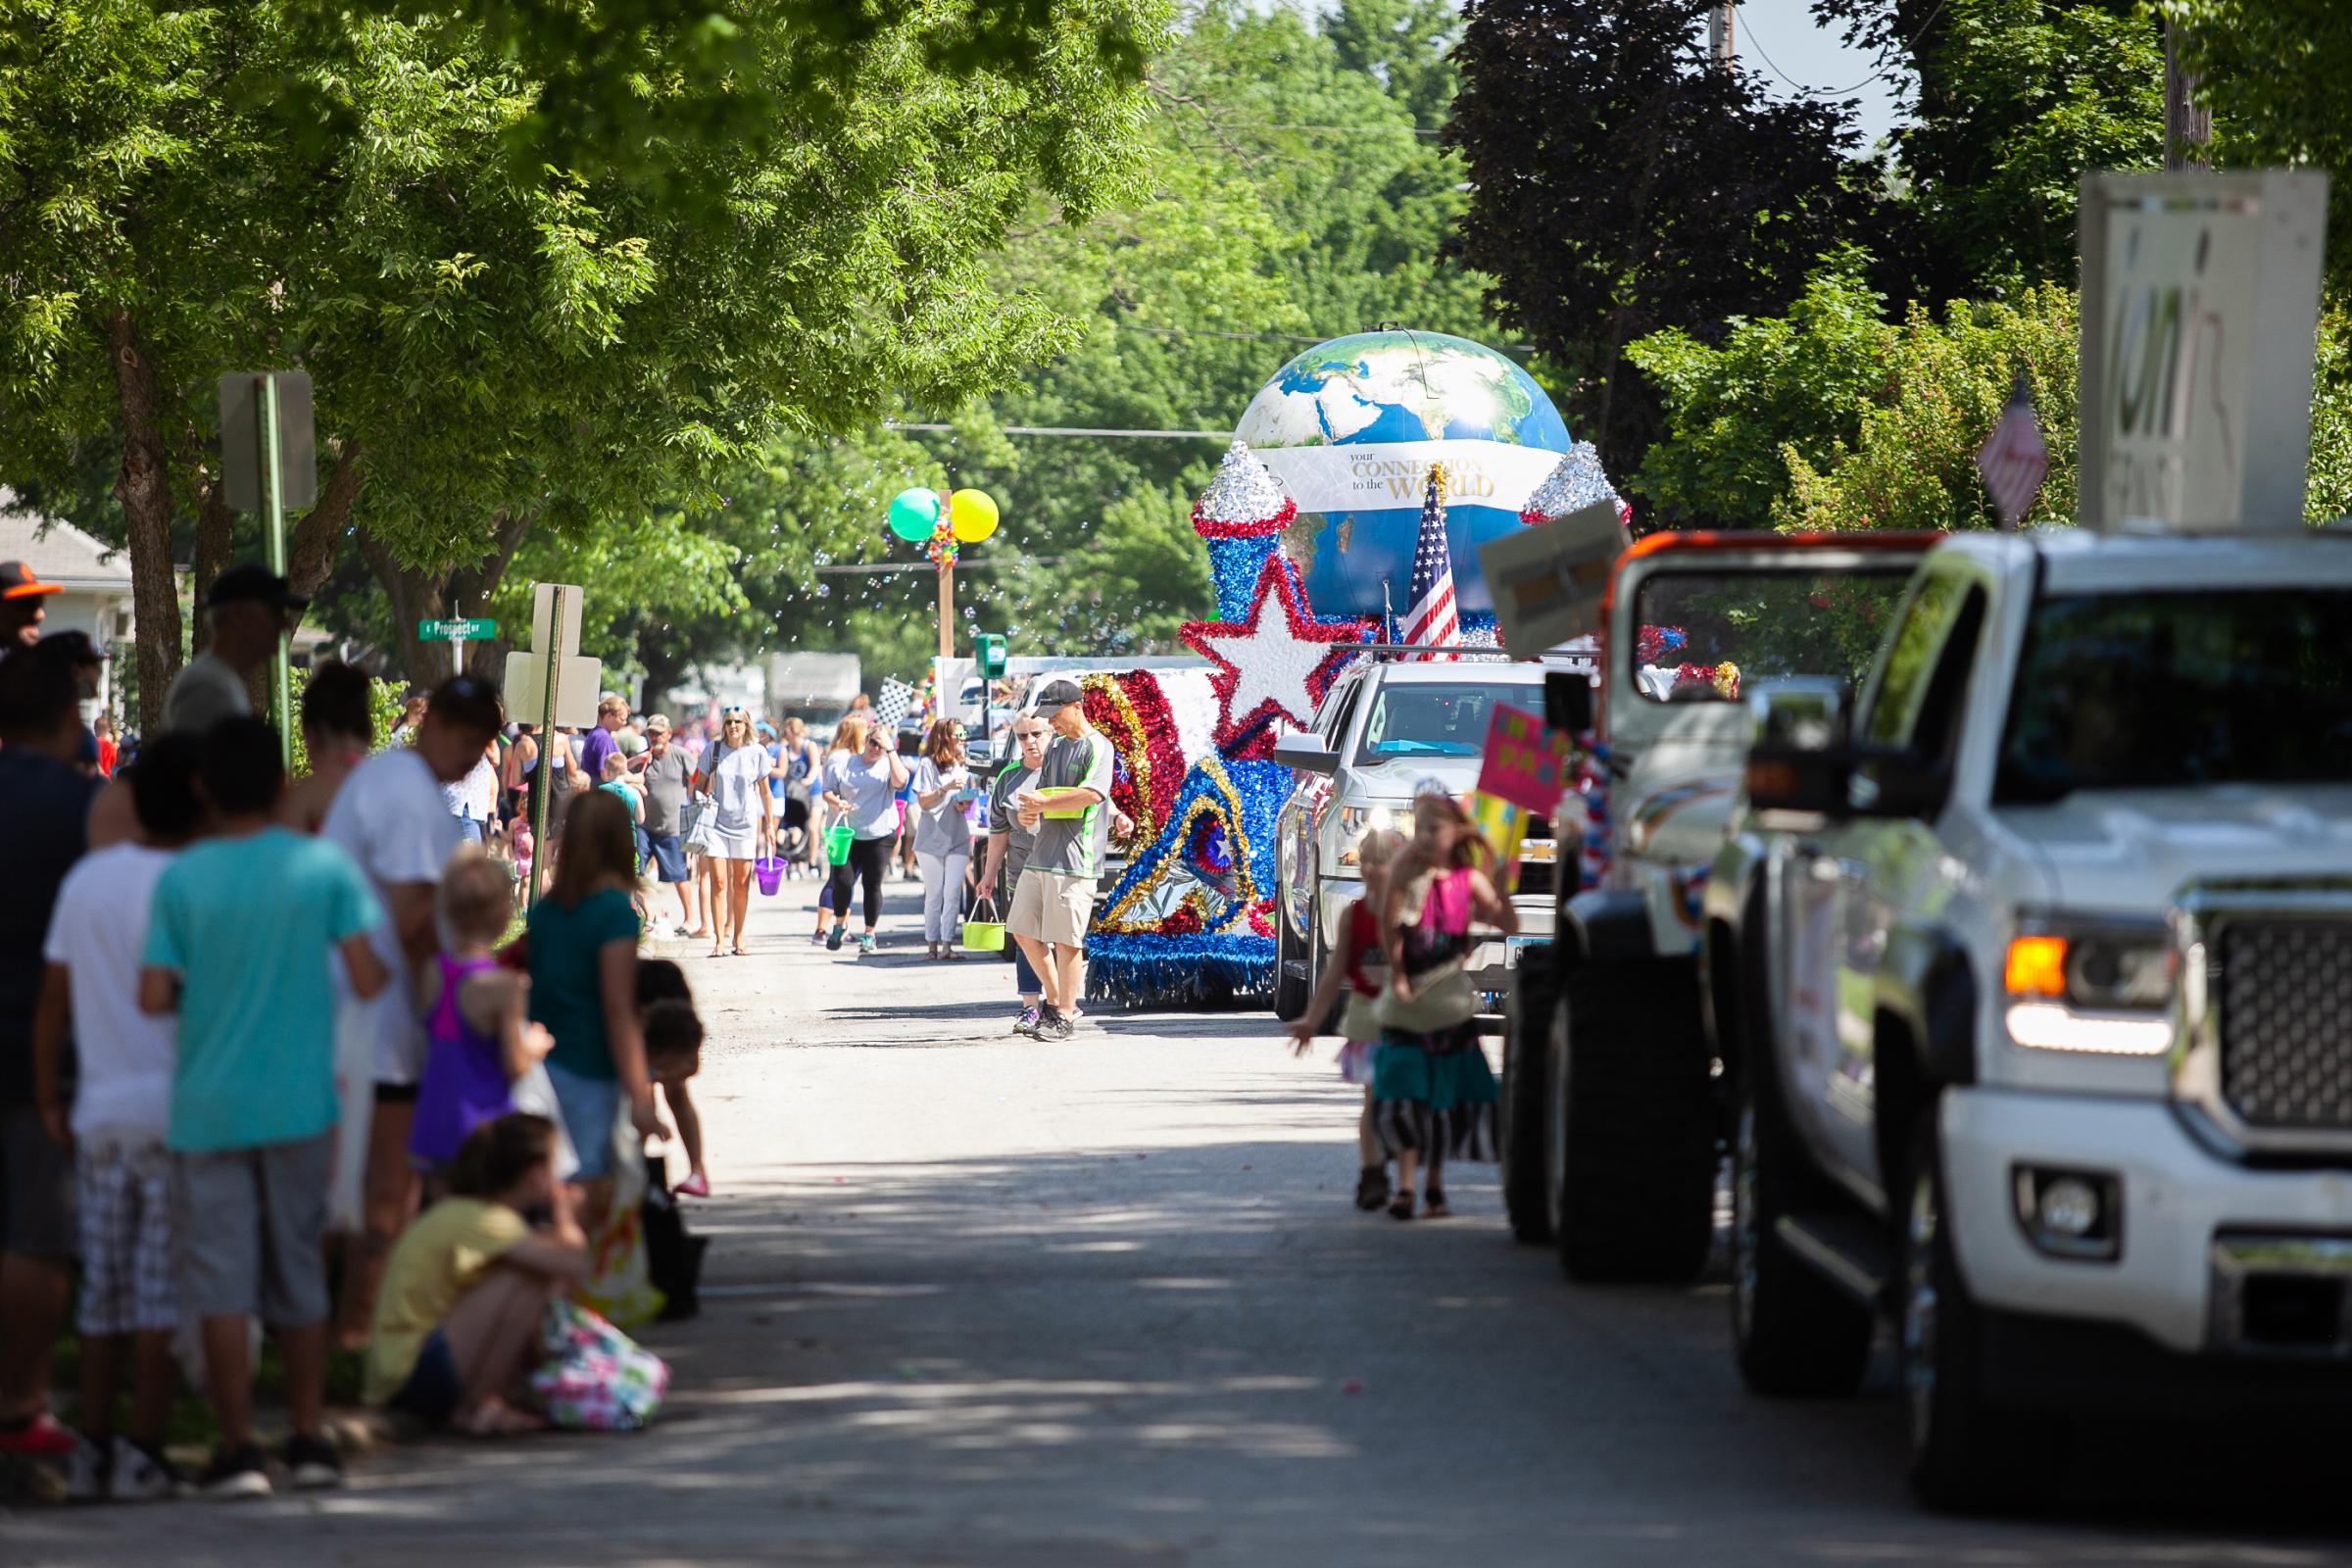 Junction Days is Red Oak's annual community celebration